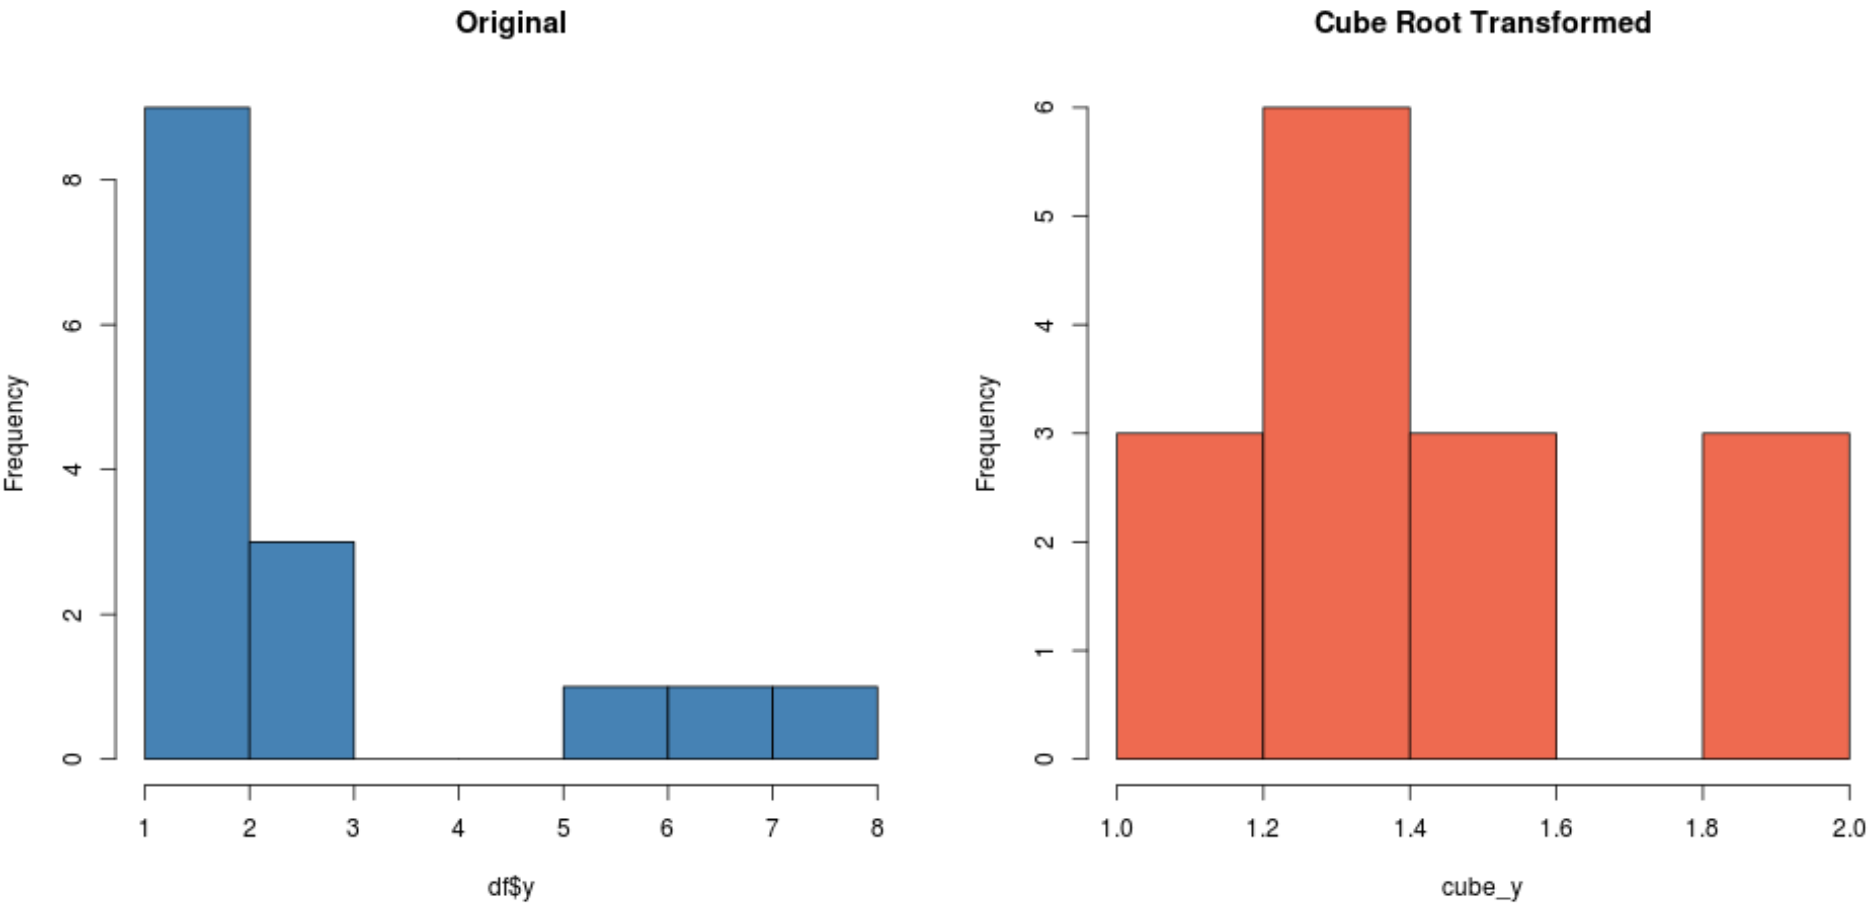 Cube root transformation in R